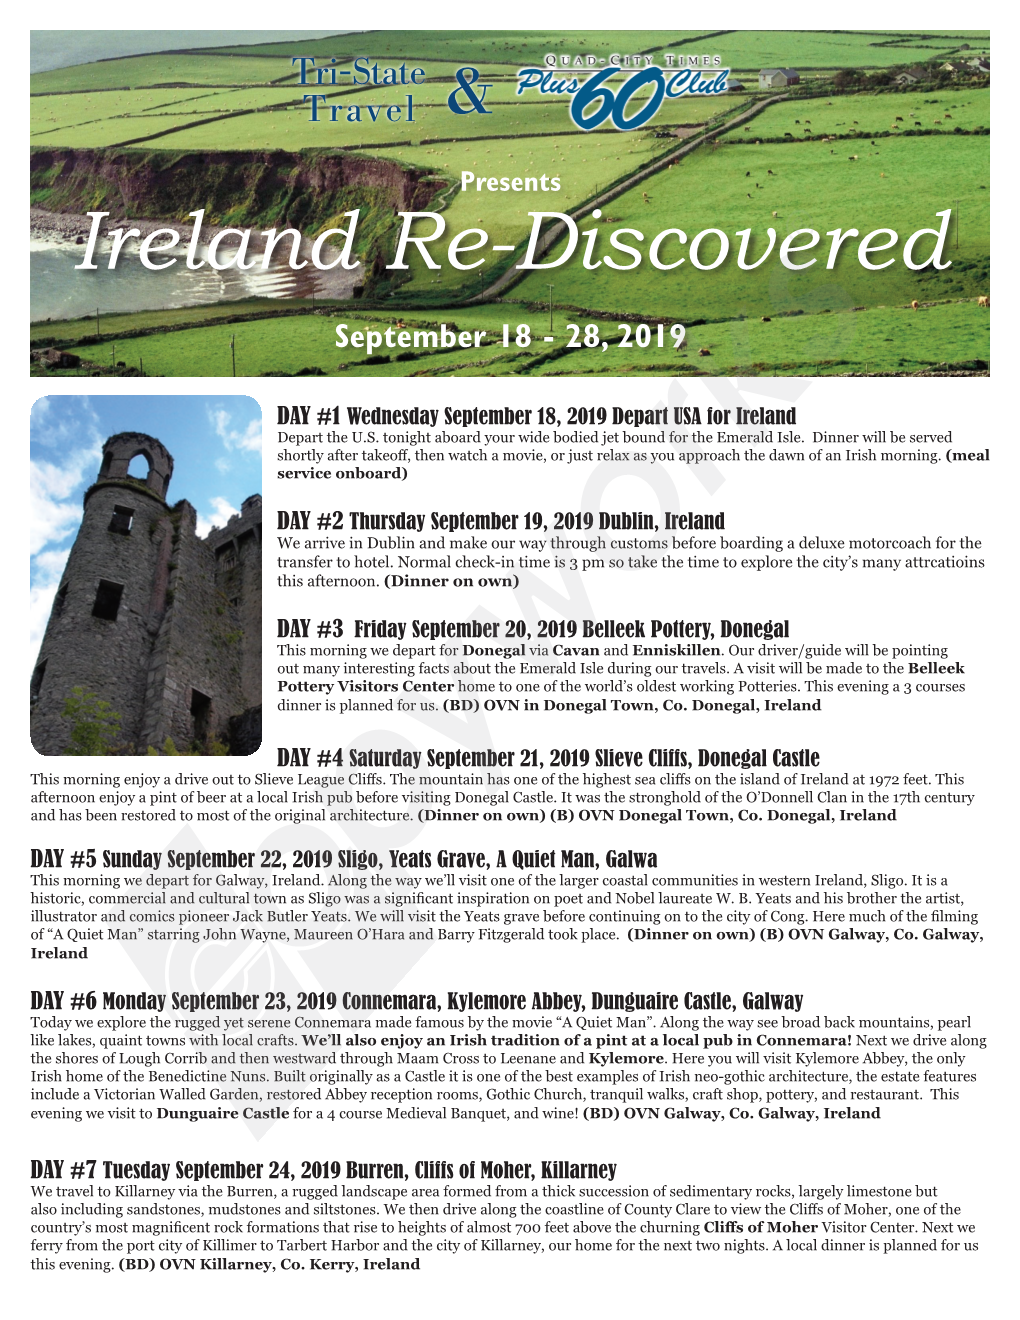 Ireland Re-Discovered